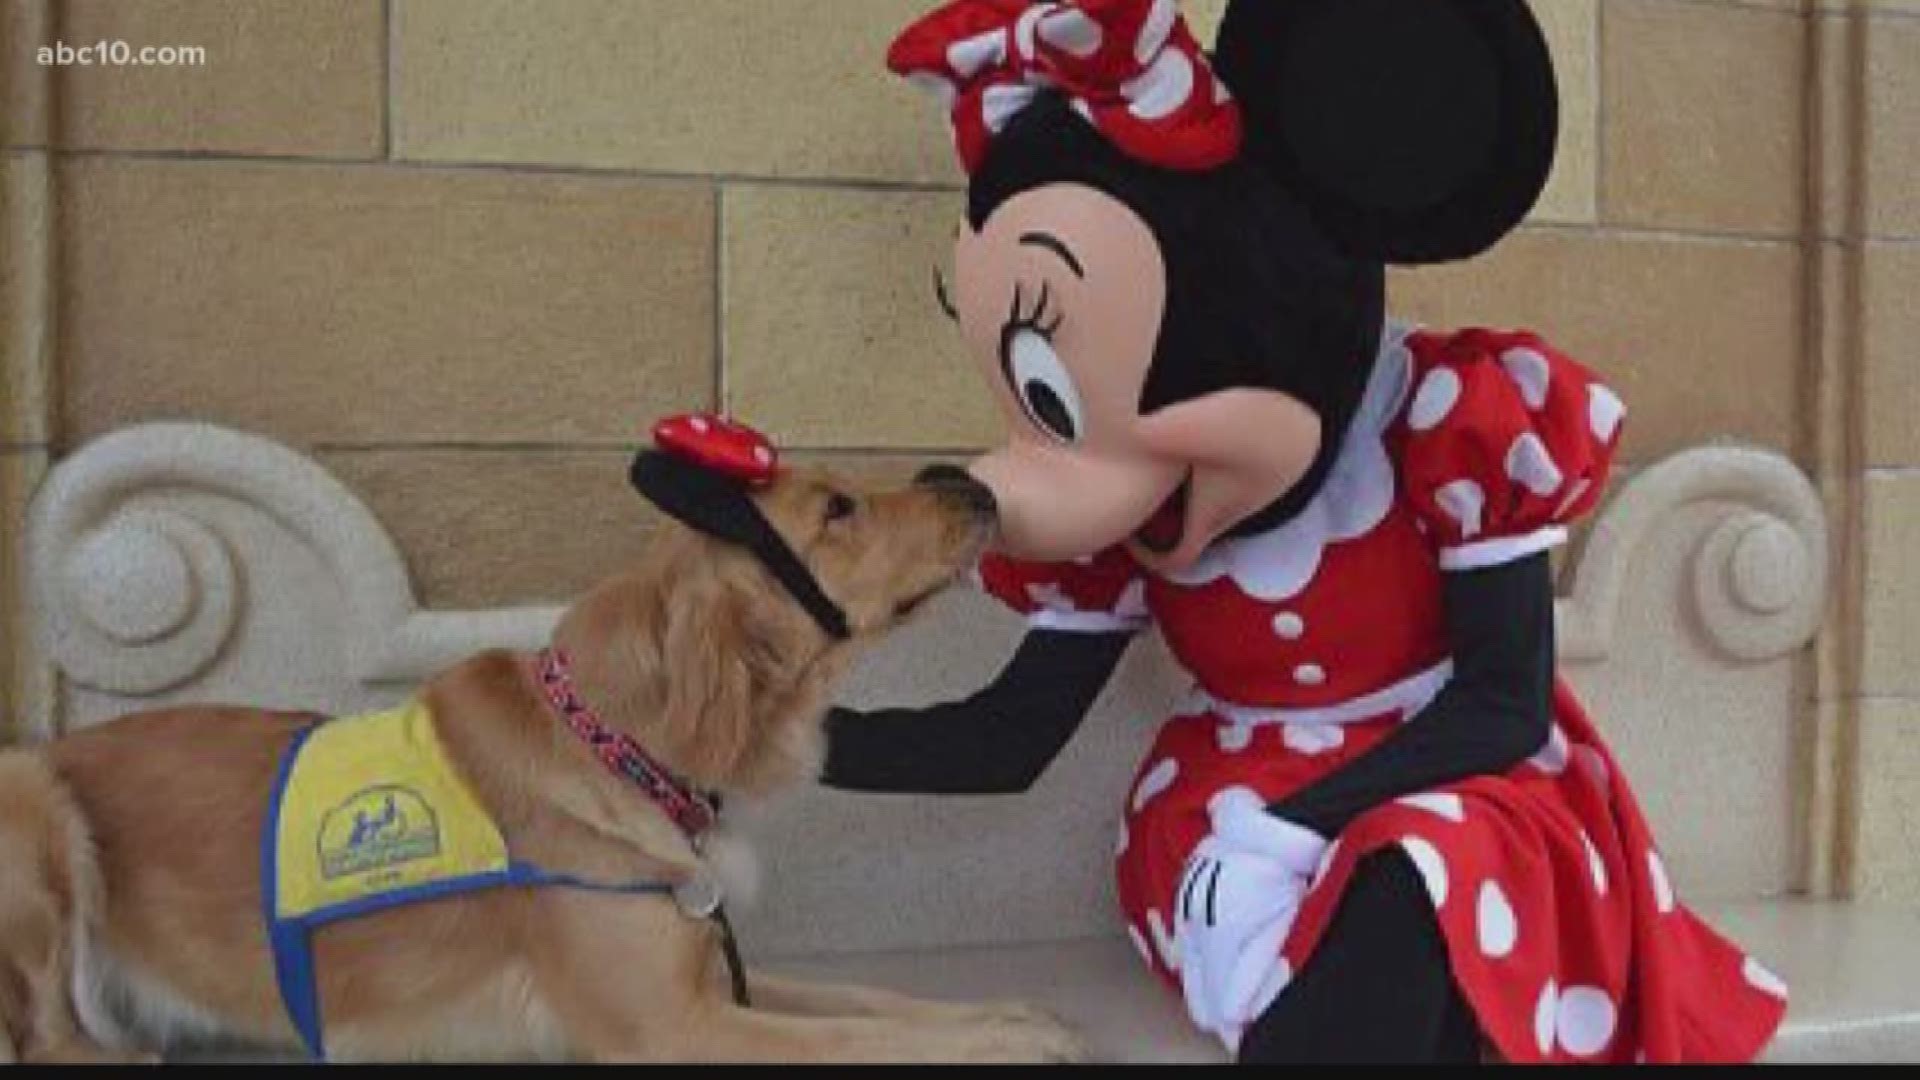 Local service dogs in training at Disney (April 5, 2018)